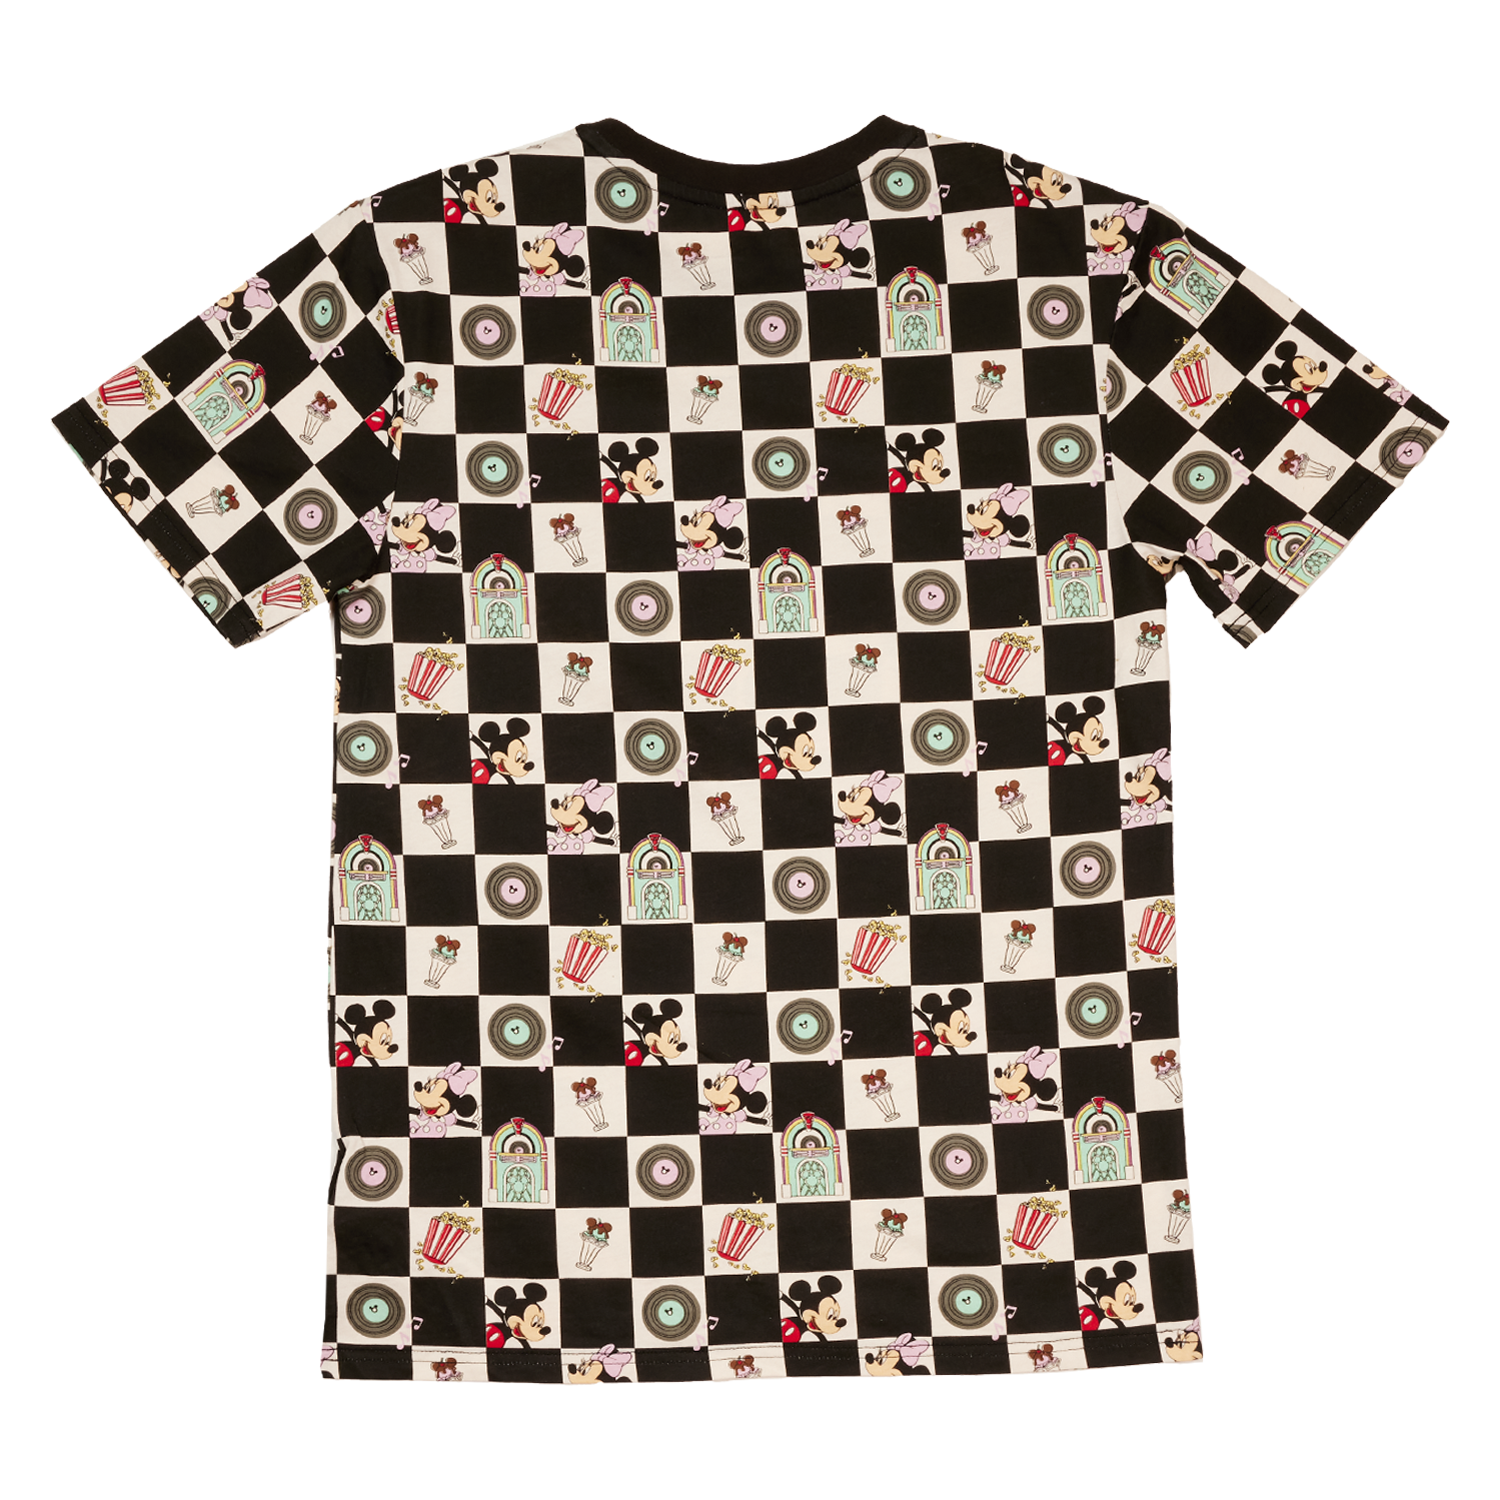 Loungefly DISNEY MICKEY AND MINNIE DATE NIGHT DINER CHECKERED UNISEX TEE